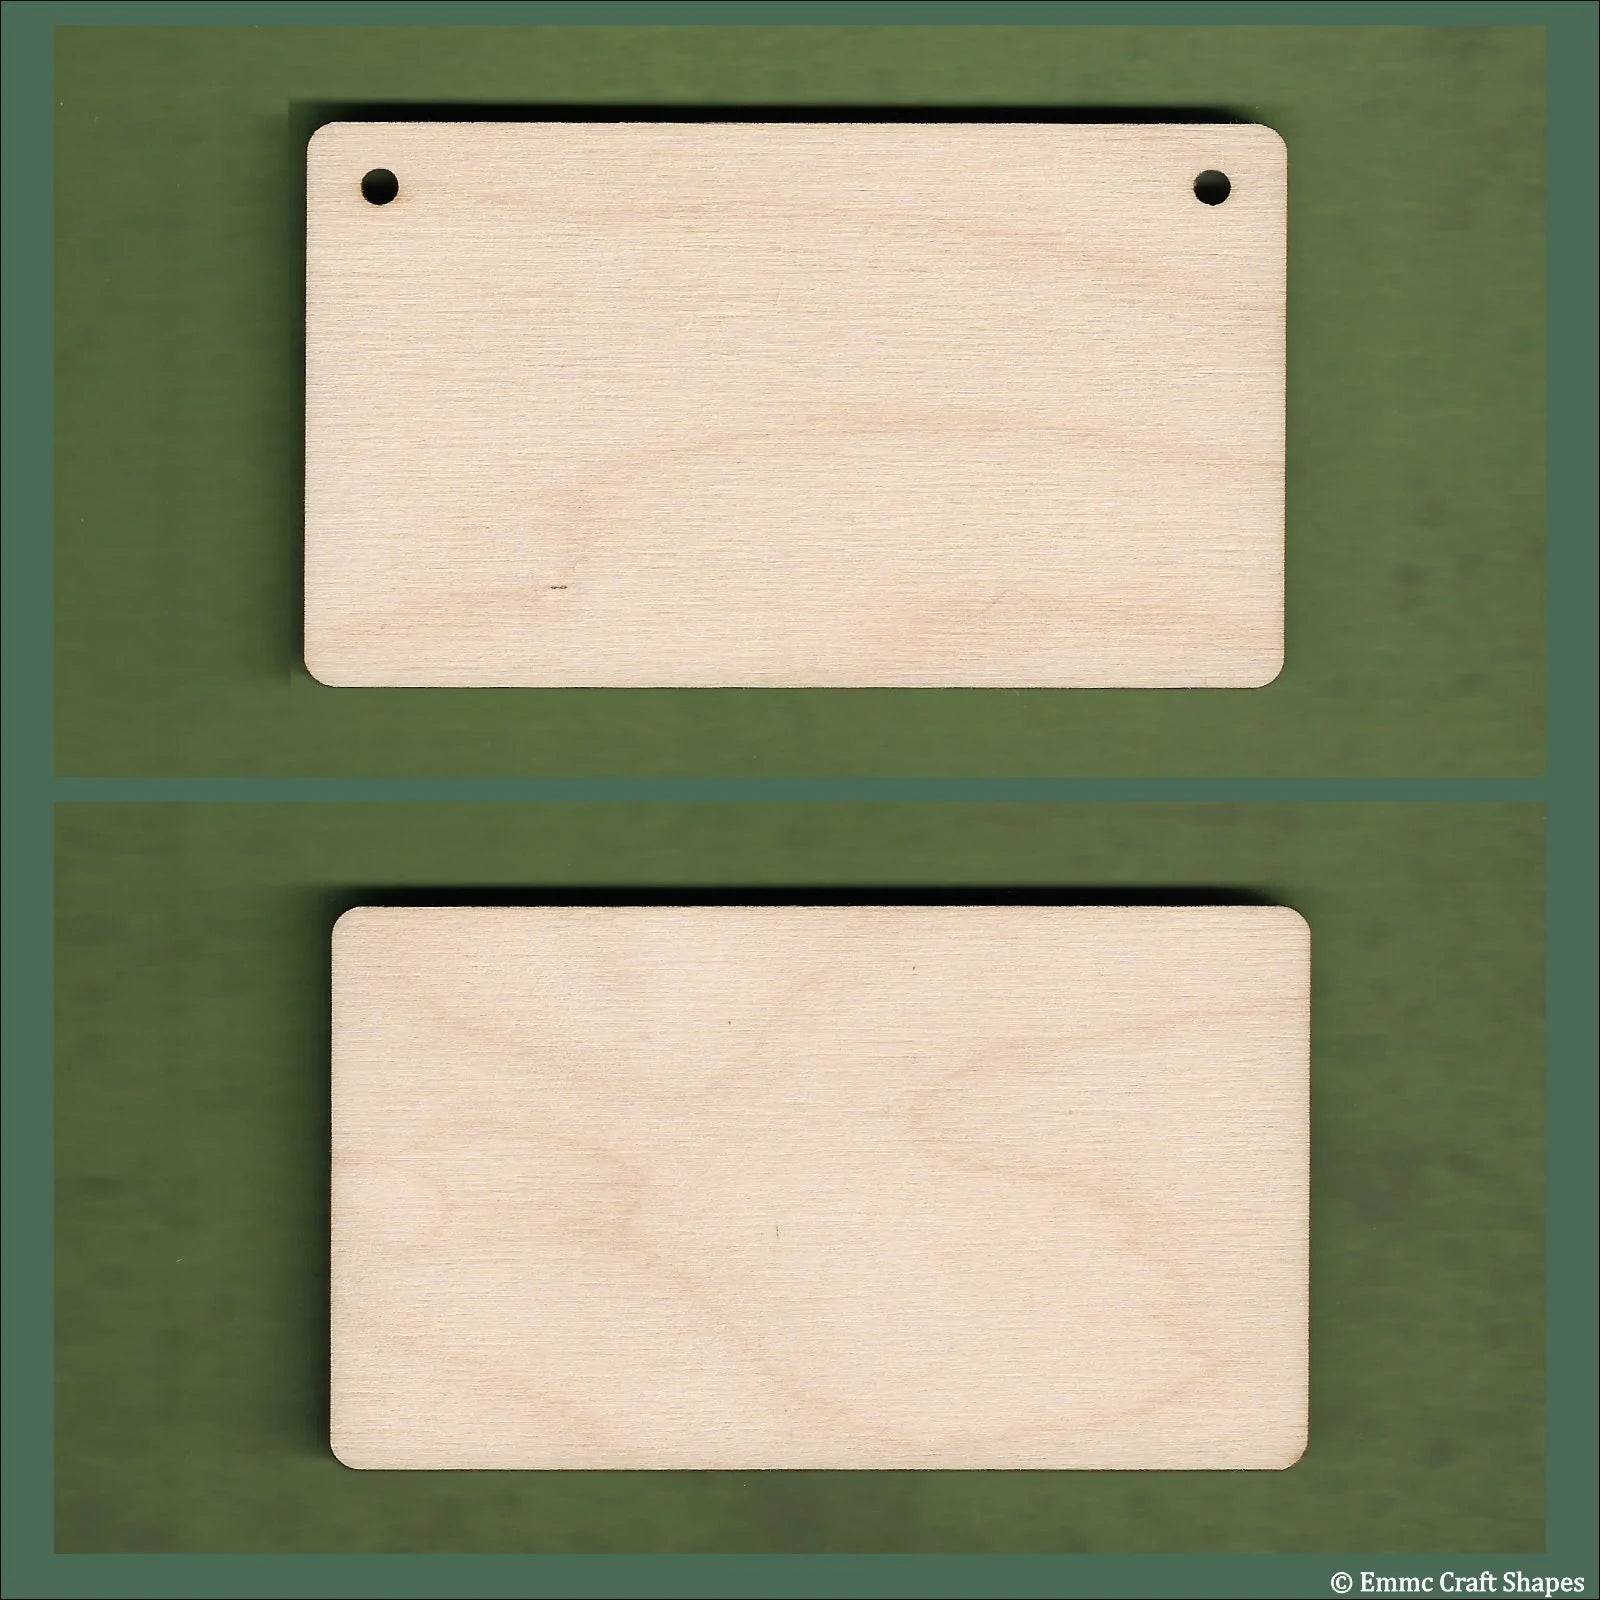 4mm poplar plywood Plaques with rounded corners